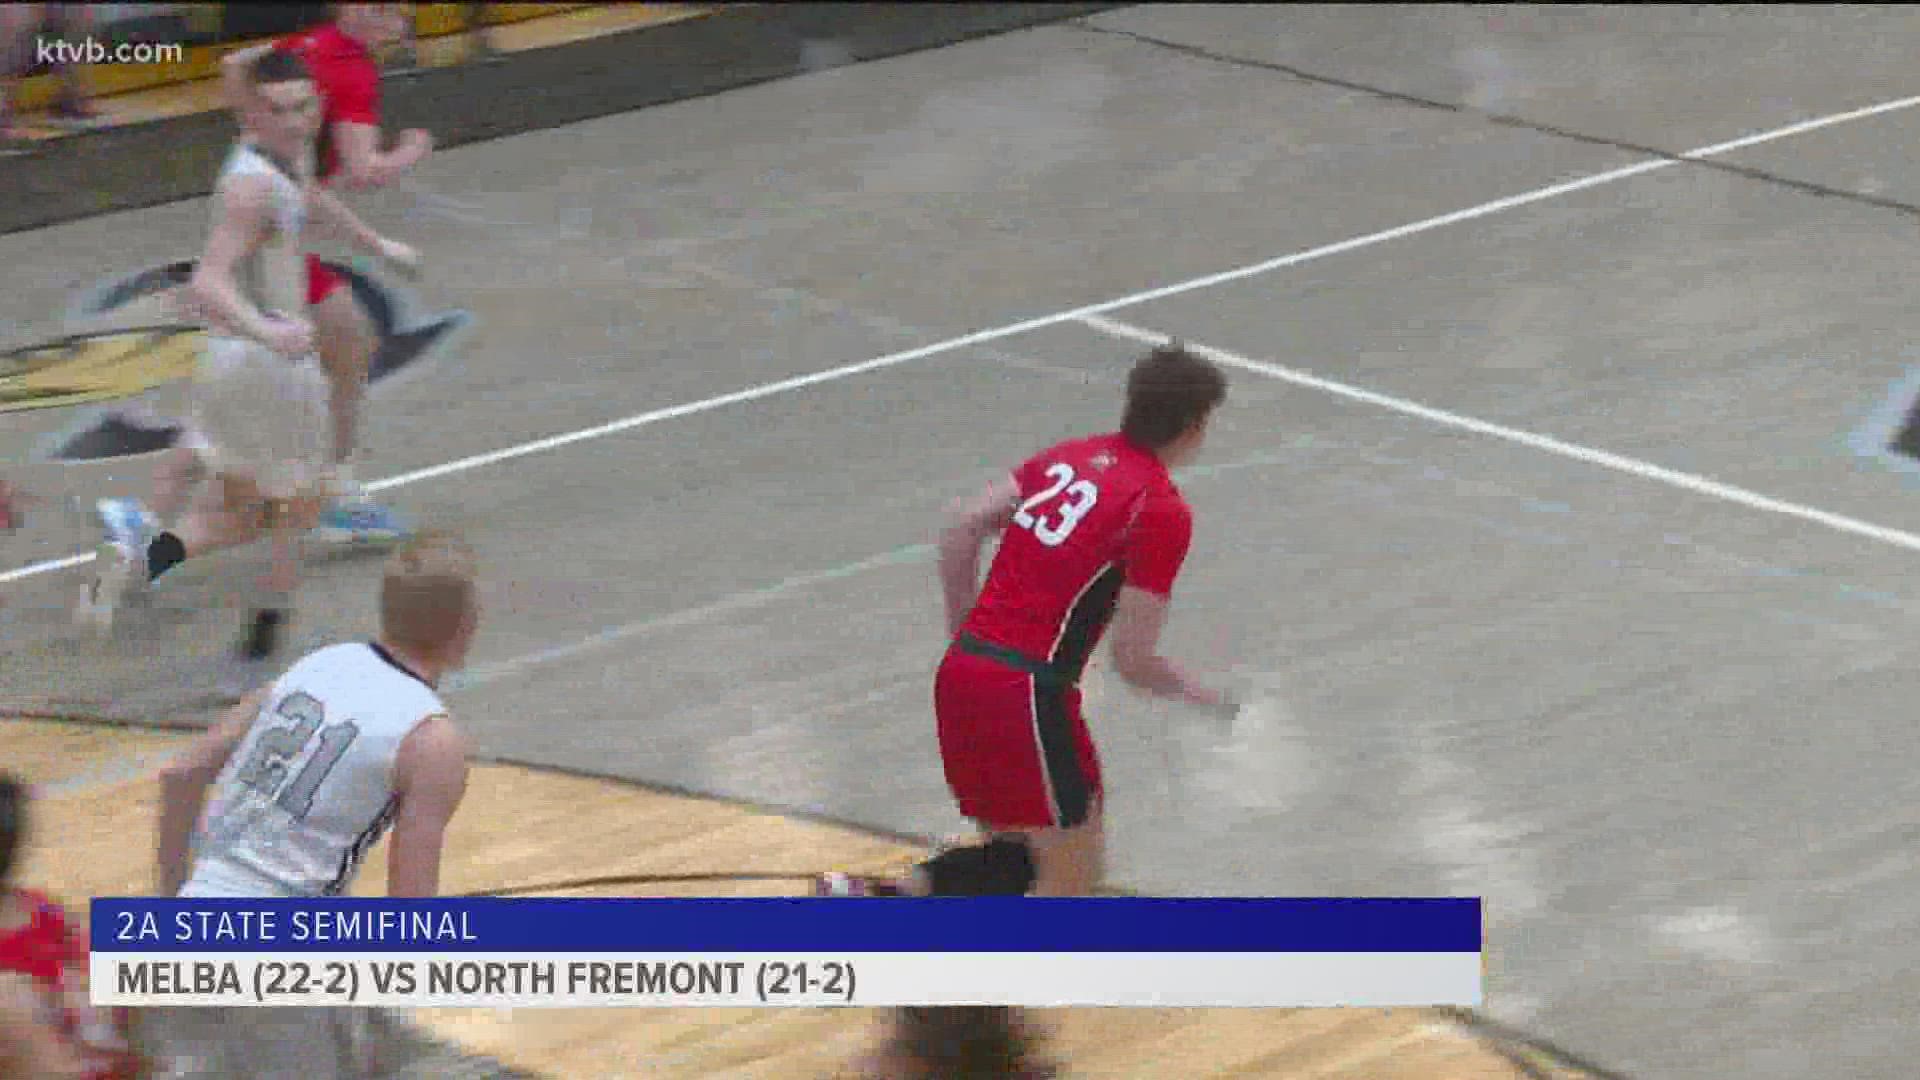 Melba handled North Fremont 61-42 Friday at Capital High School to earn a shot at the 2A state championship Saturday.